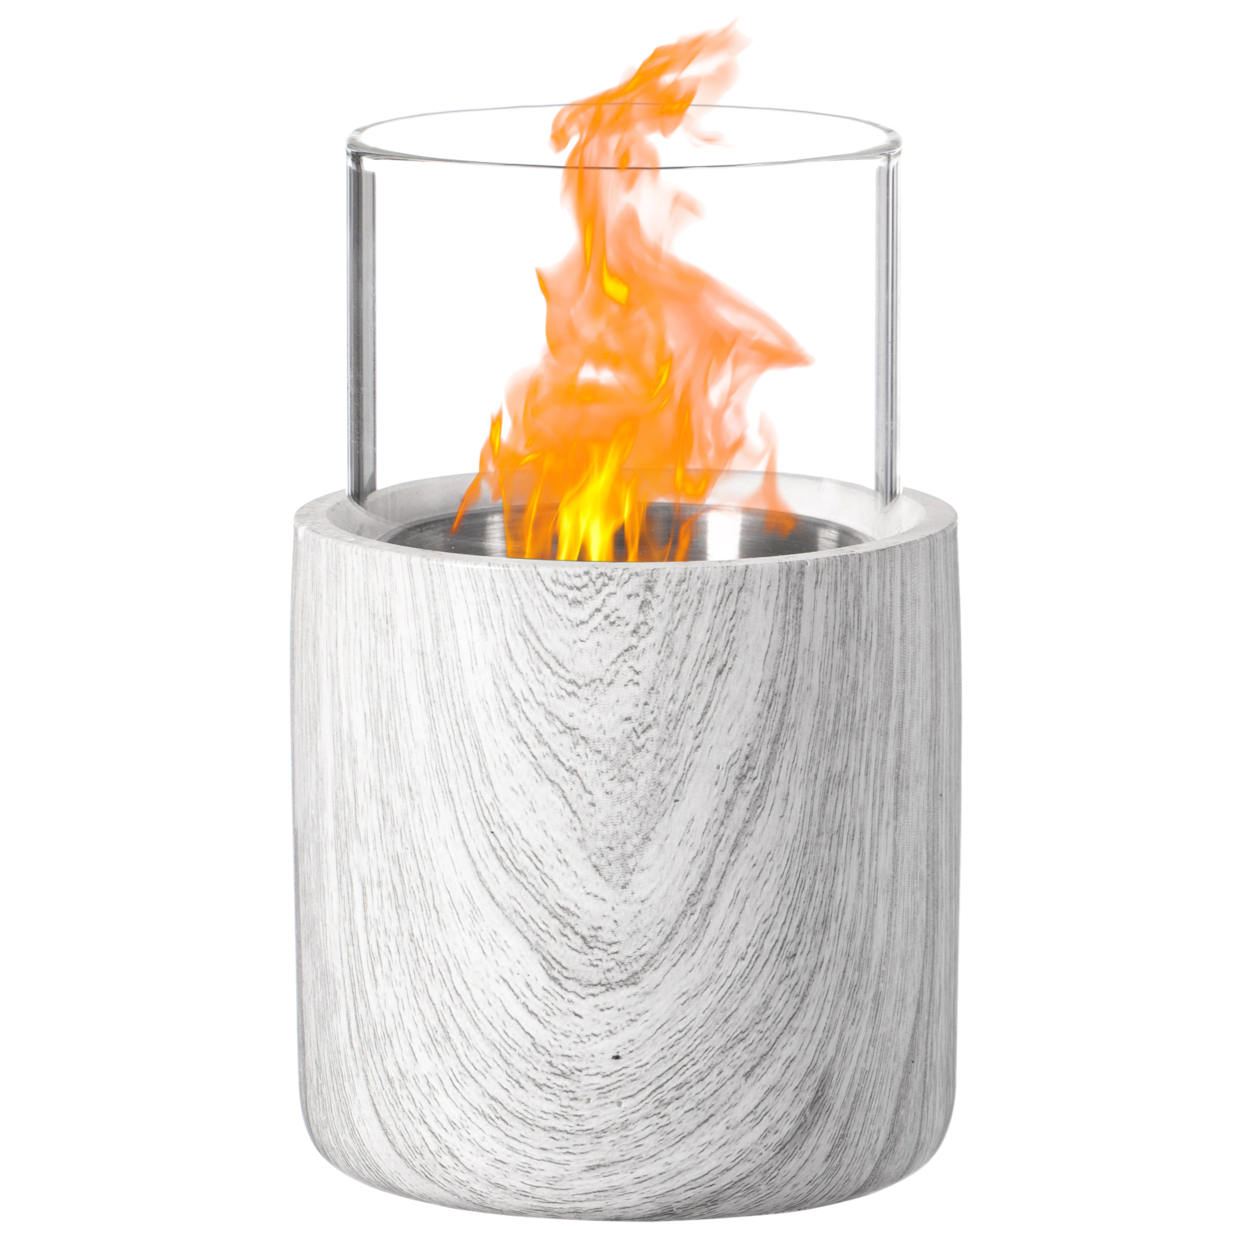 Mini Tabletop Fire Pit Rubbing Alcohol Fireplace Indoor Outdoor Portable Fire Concrete Bowl Pot Fireplace - Low Glass